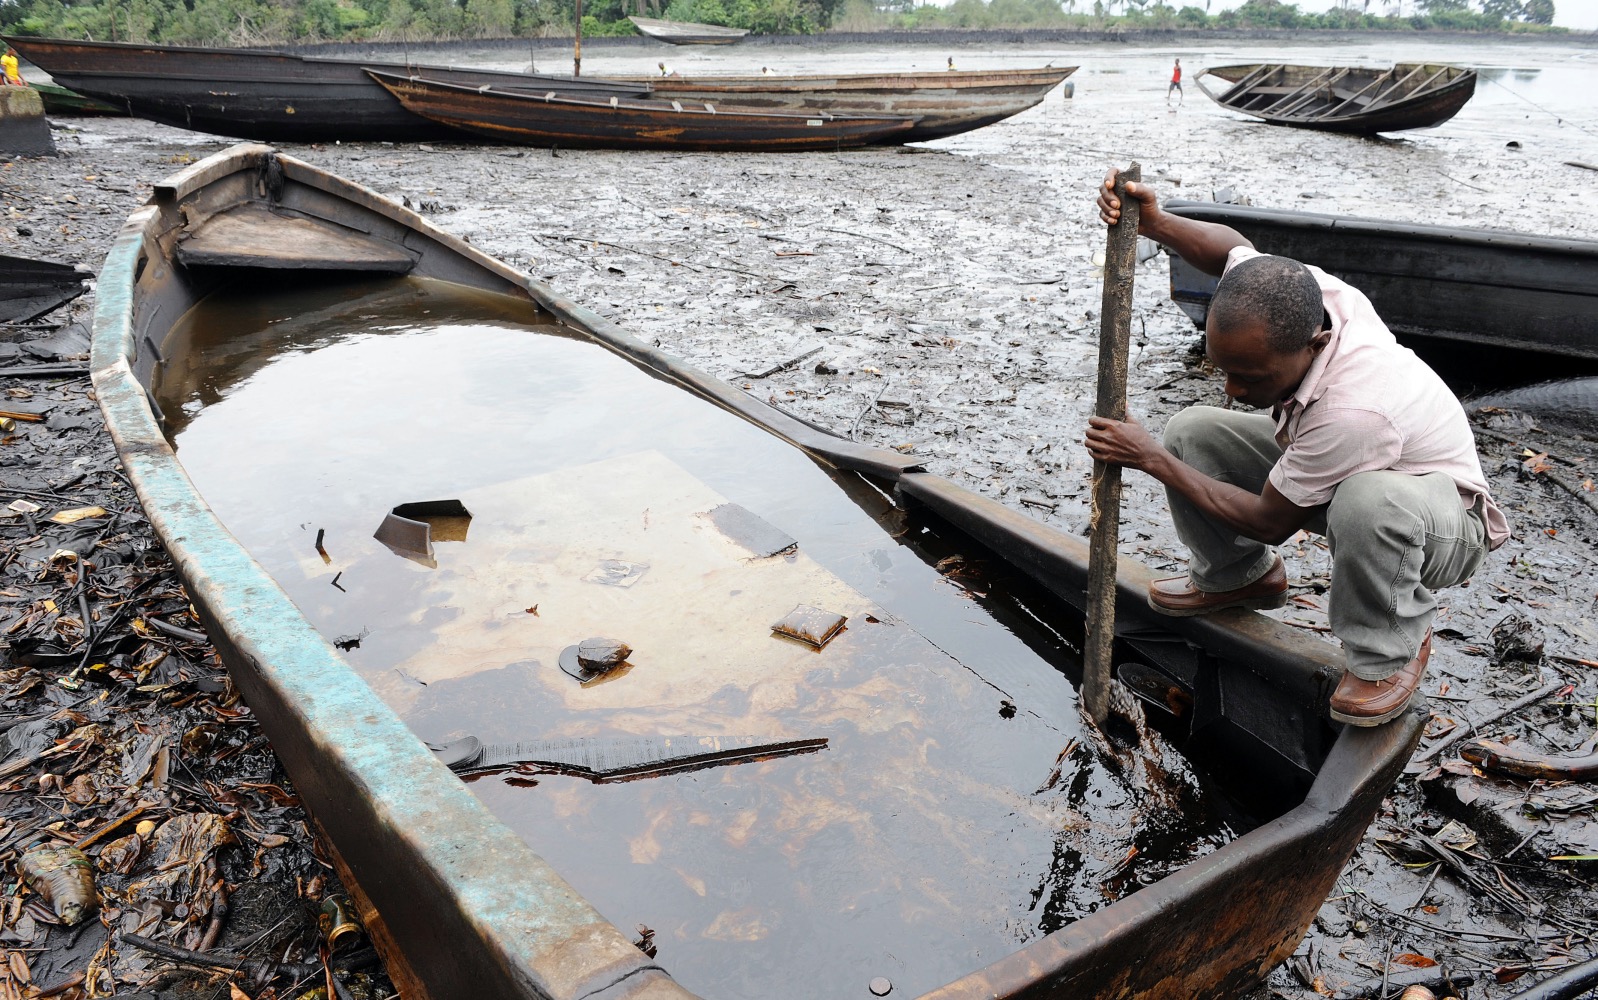 FILE: An indigene of Bodo, Ogoniland region in Rivers State, tries to separate with a stick the crude oil from water in a boat at the Bodo waterways polluted by oil spills attributed to Shell equipment failure August 11, 2011. (Photo Credit: AFP/Pius Ekpei)